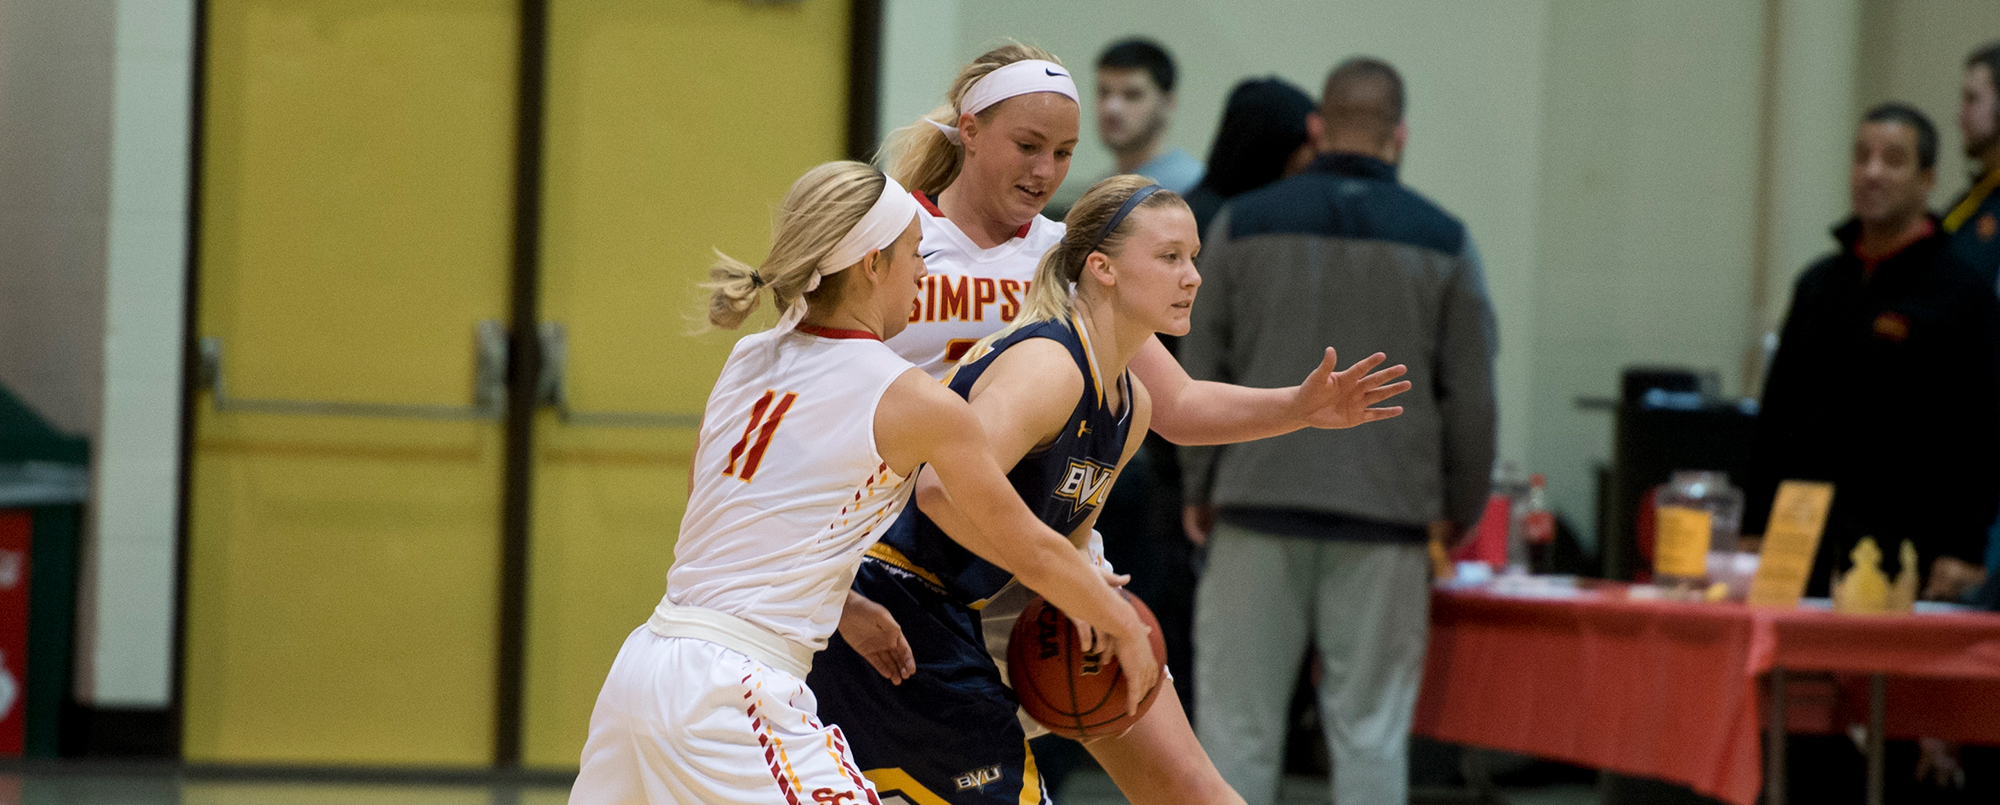 WBB Preview: Storm travel to Dubuque looking to get back on track